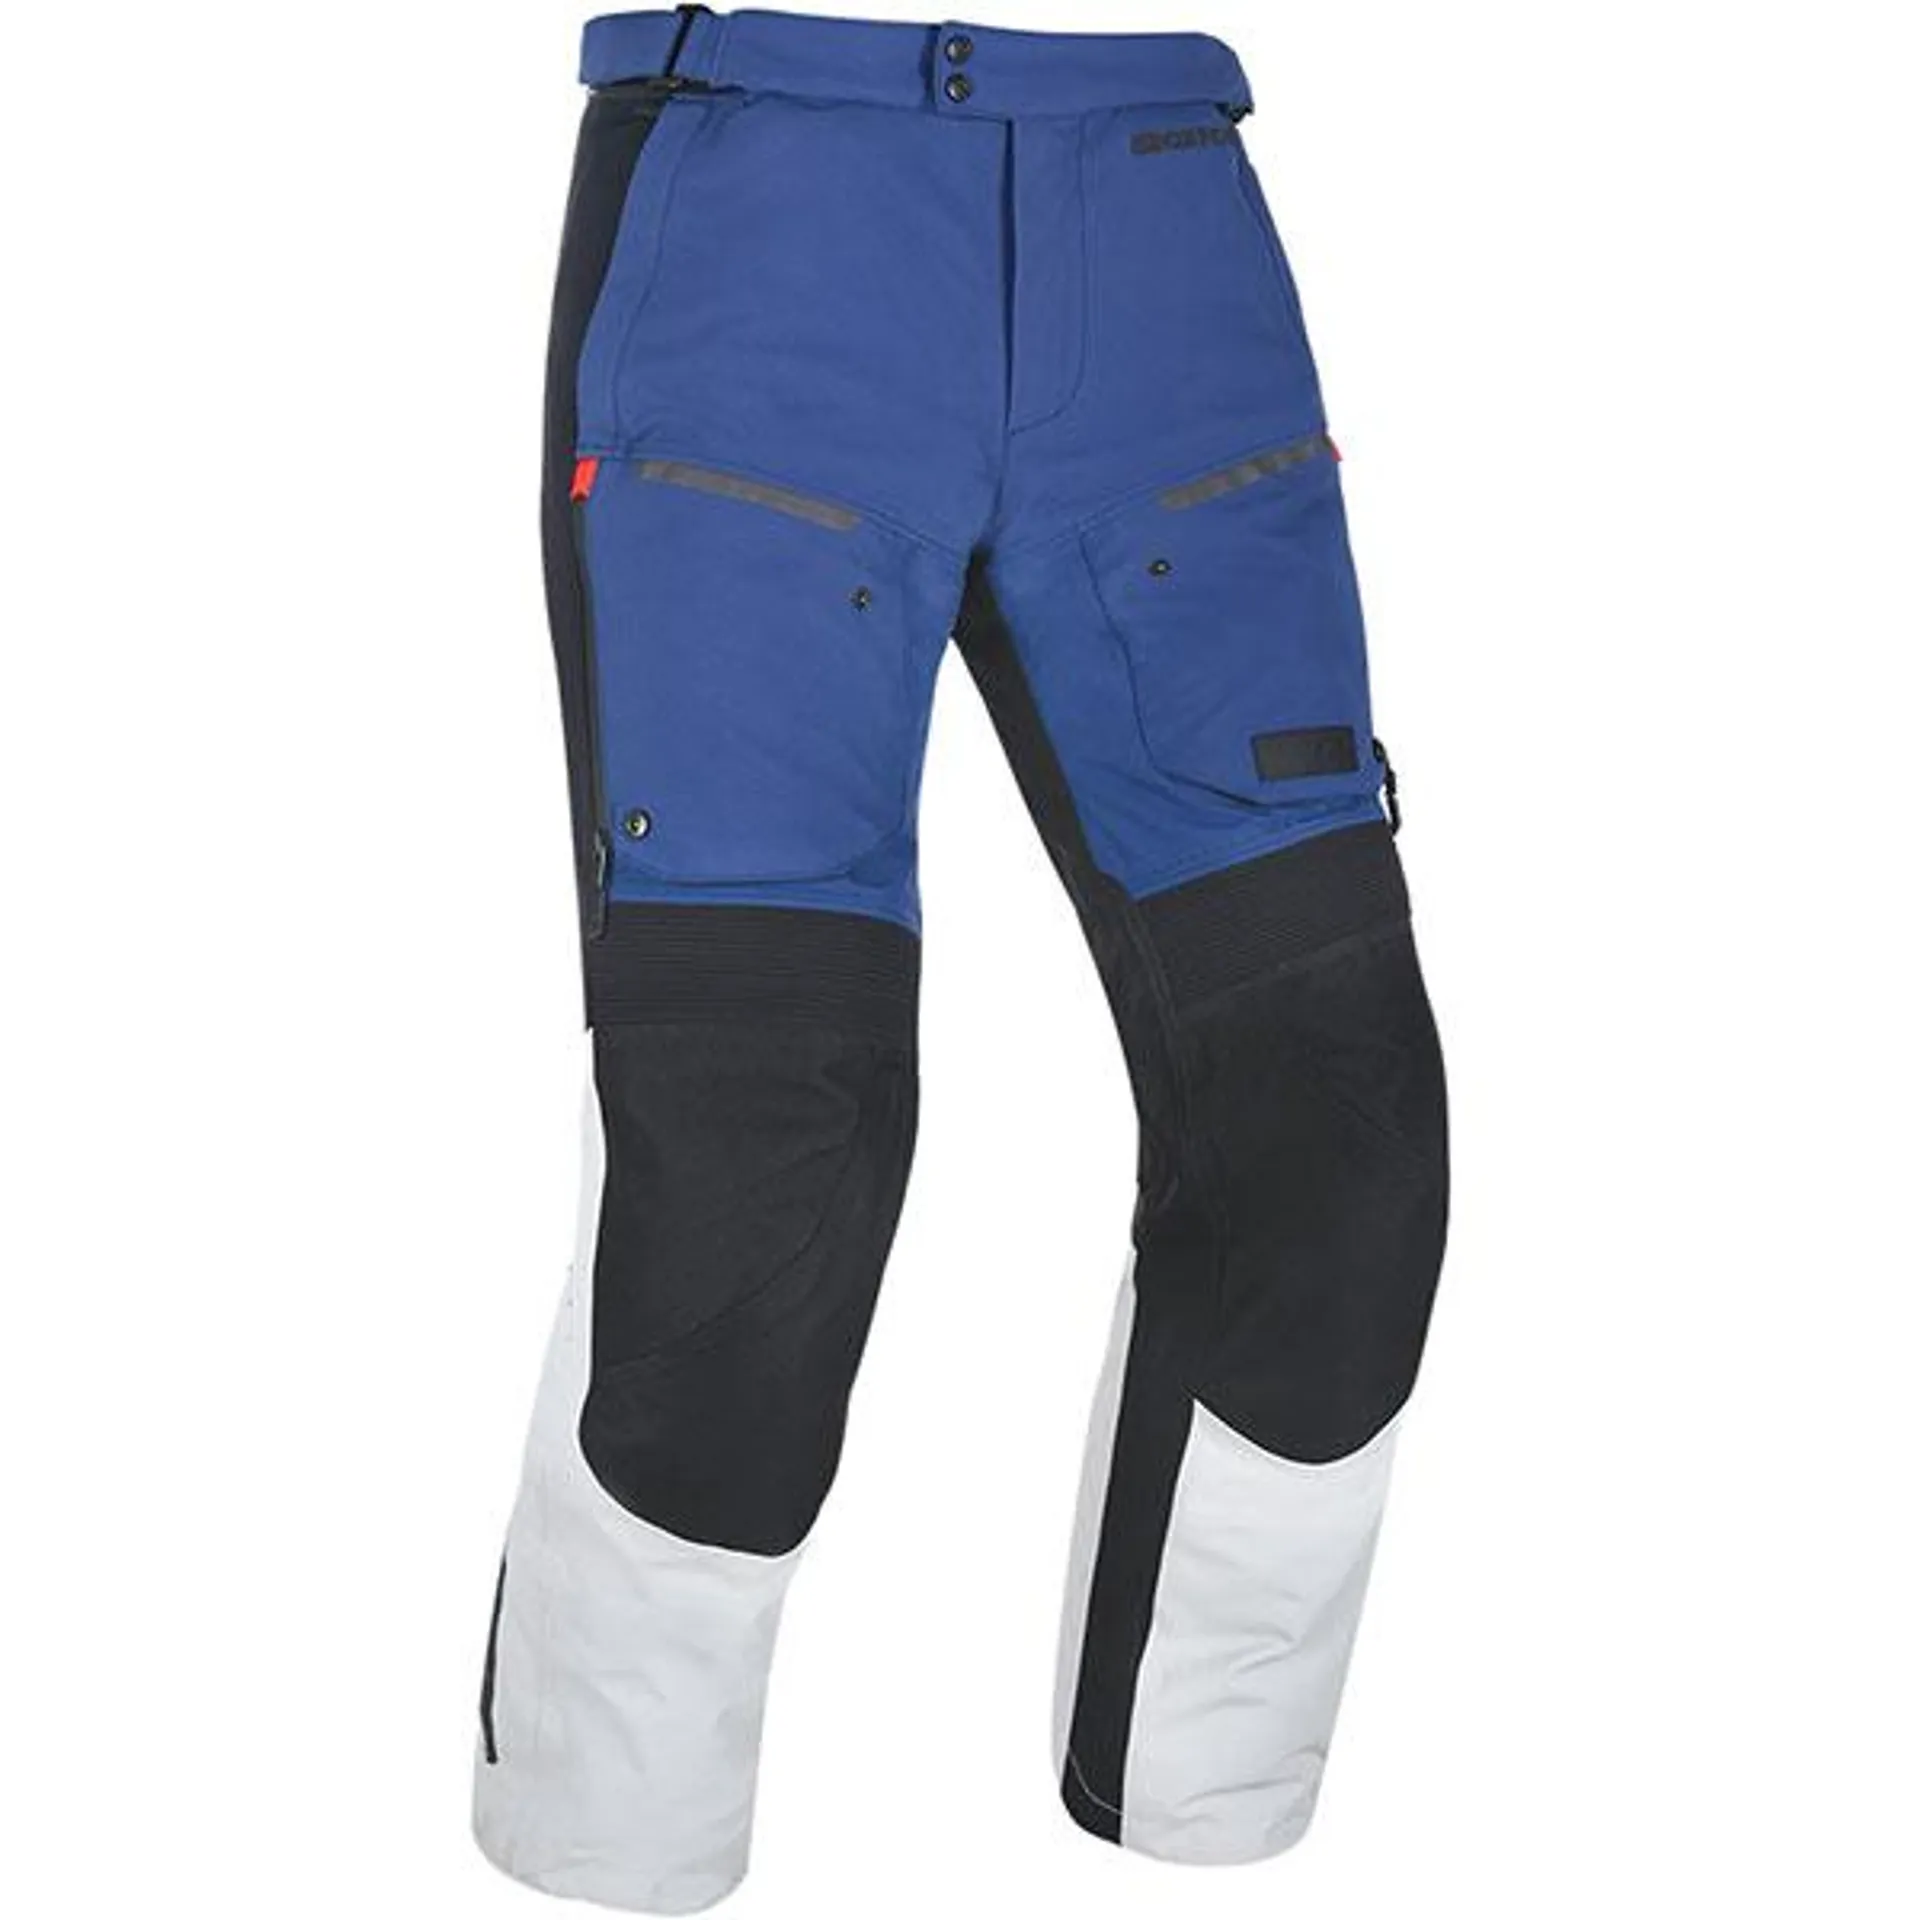 Oxford Mondial Advanced Textile Trousers - Grey / Blue / Red